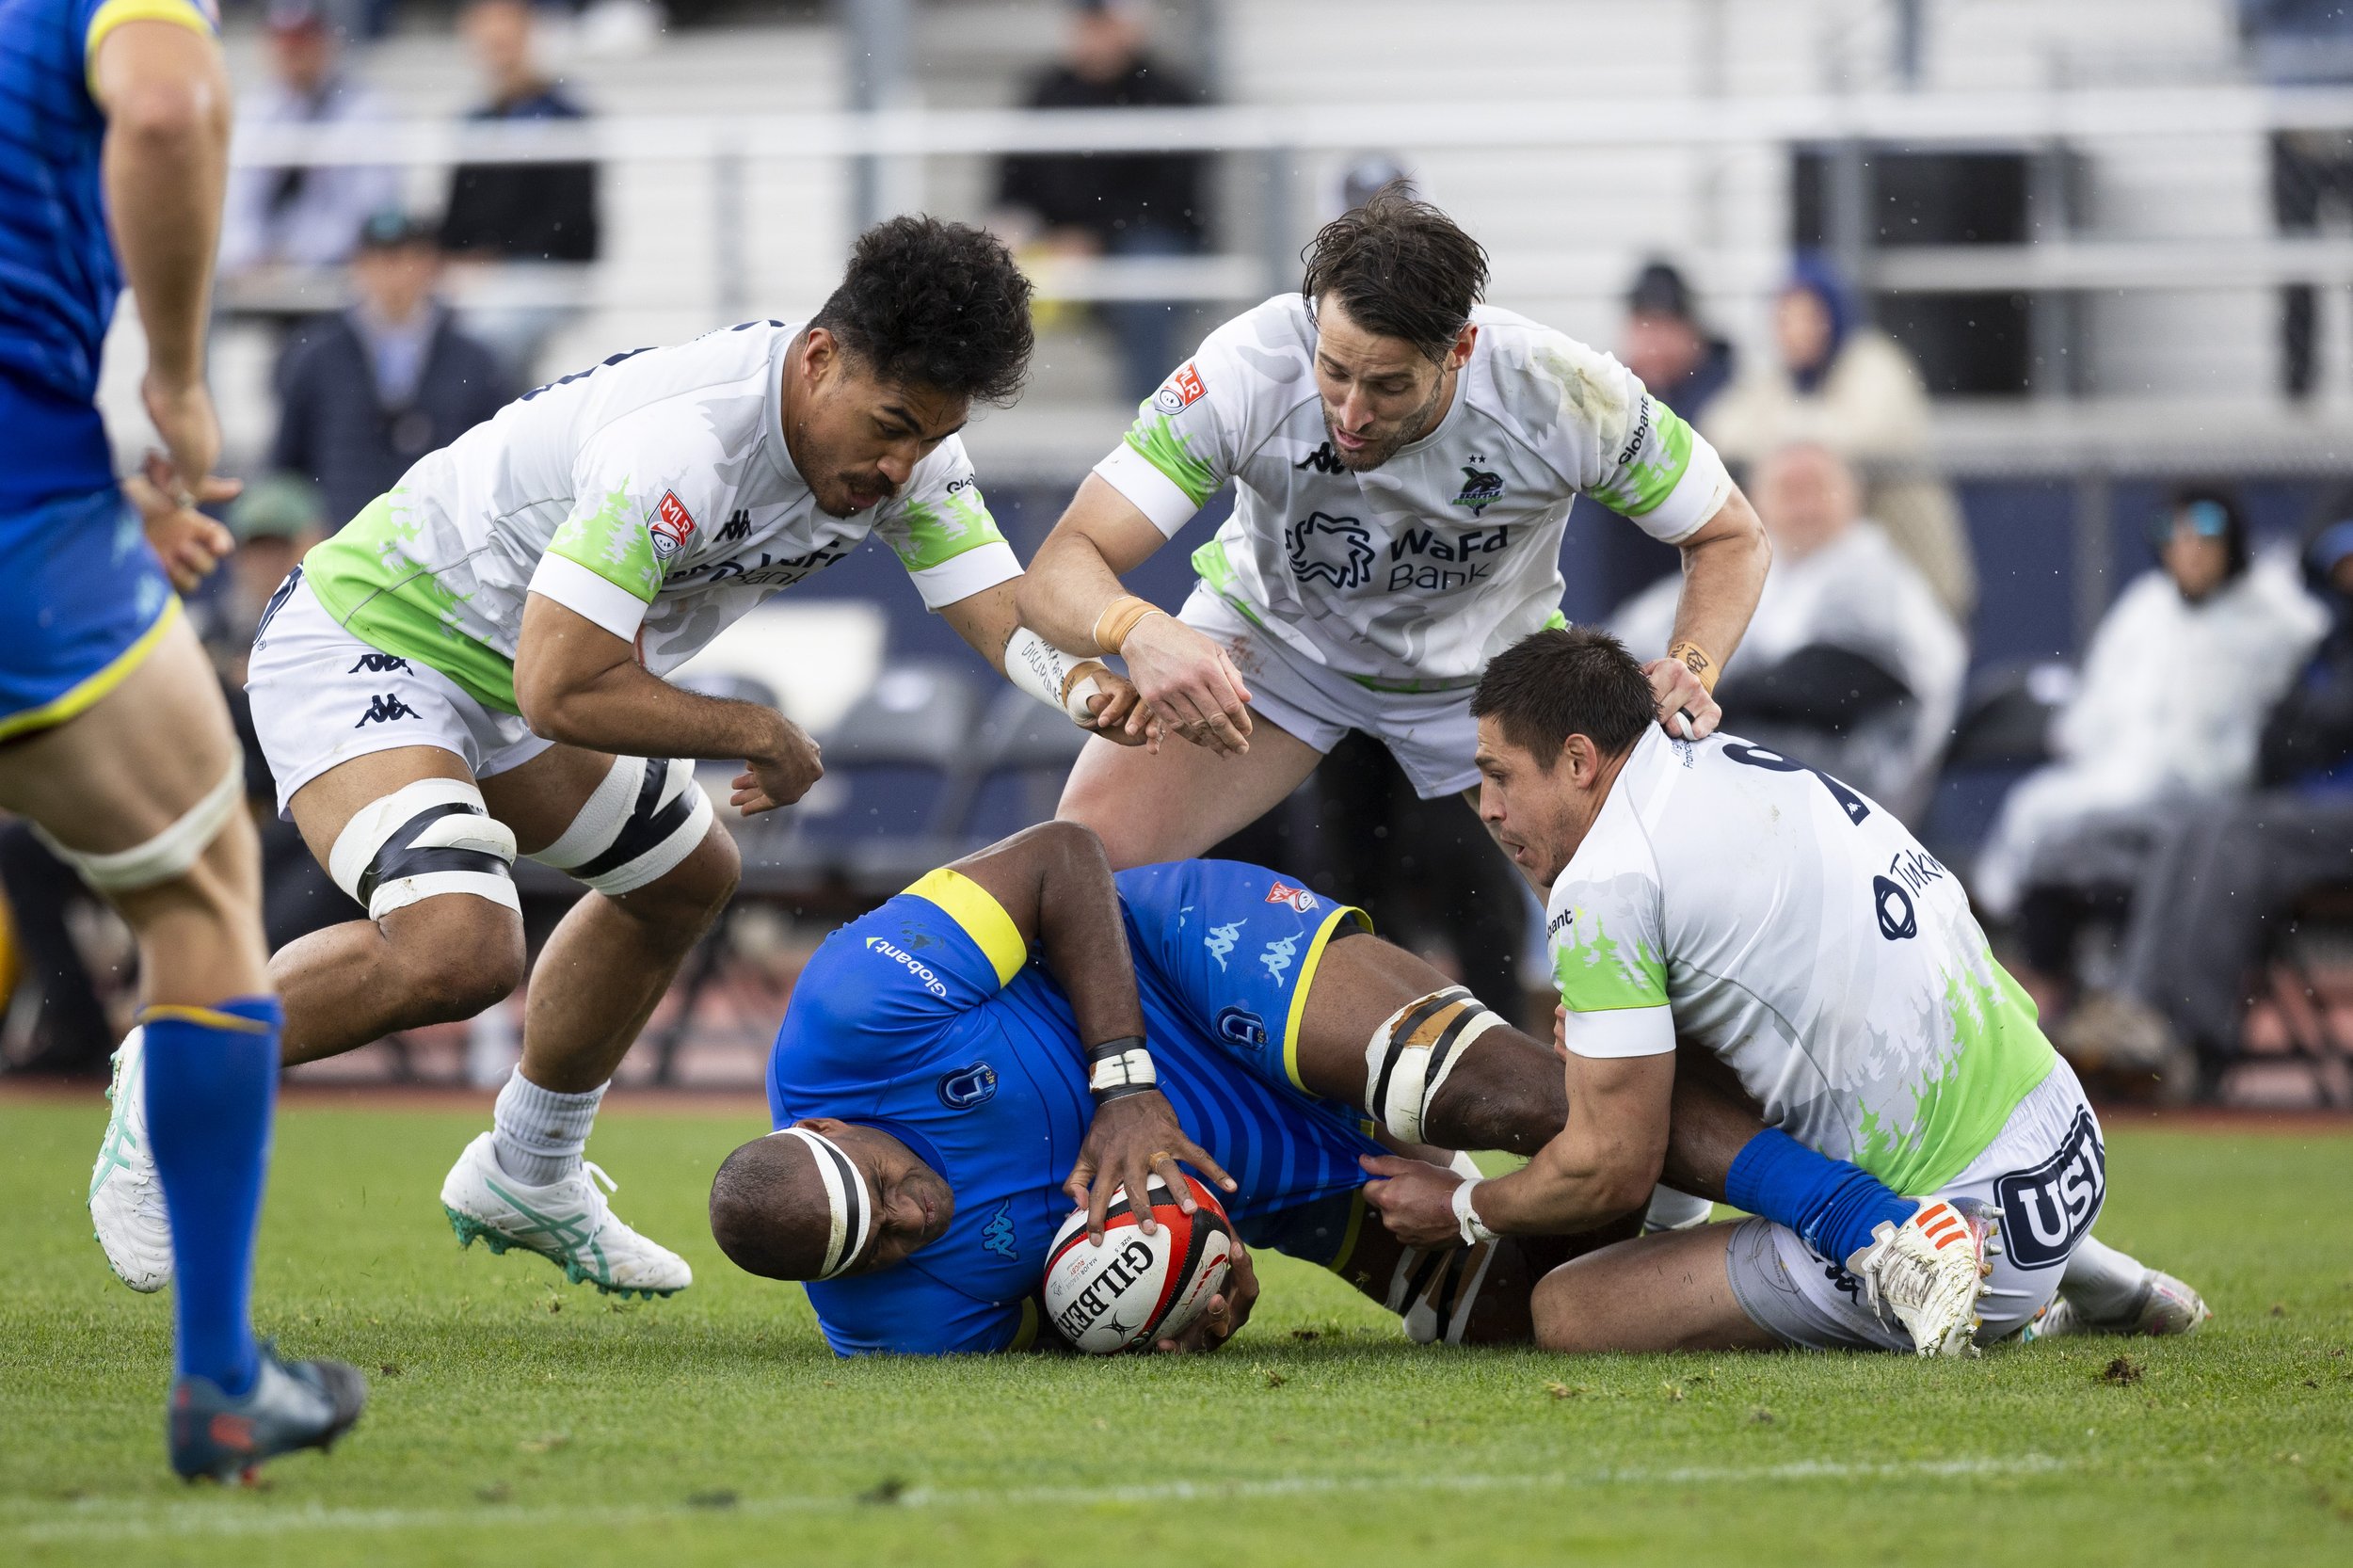  Seattle Seawolves flanker Haini Pagopagohokma (left), fly half Samuel Windsor (upper center), and scrum half Juan-Phillip Smith (right) tackle and attempt to steal the ball from Rugby Football Club Los Angeles lock Semi Kunatani (lower center) durin